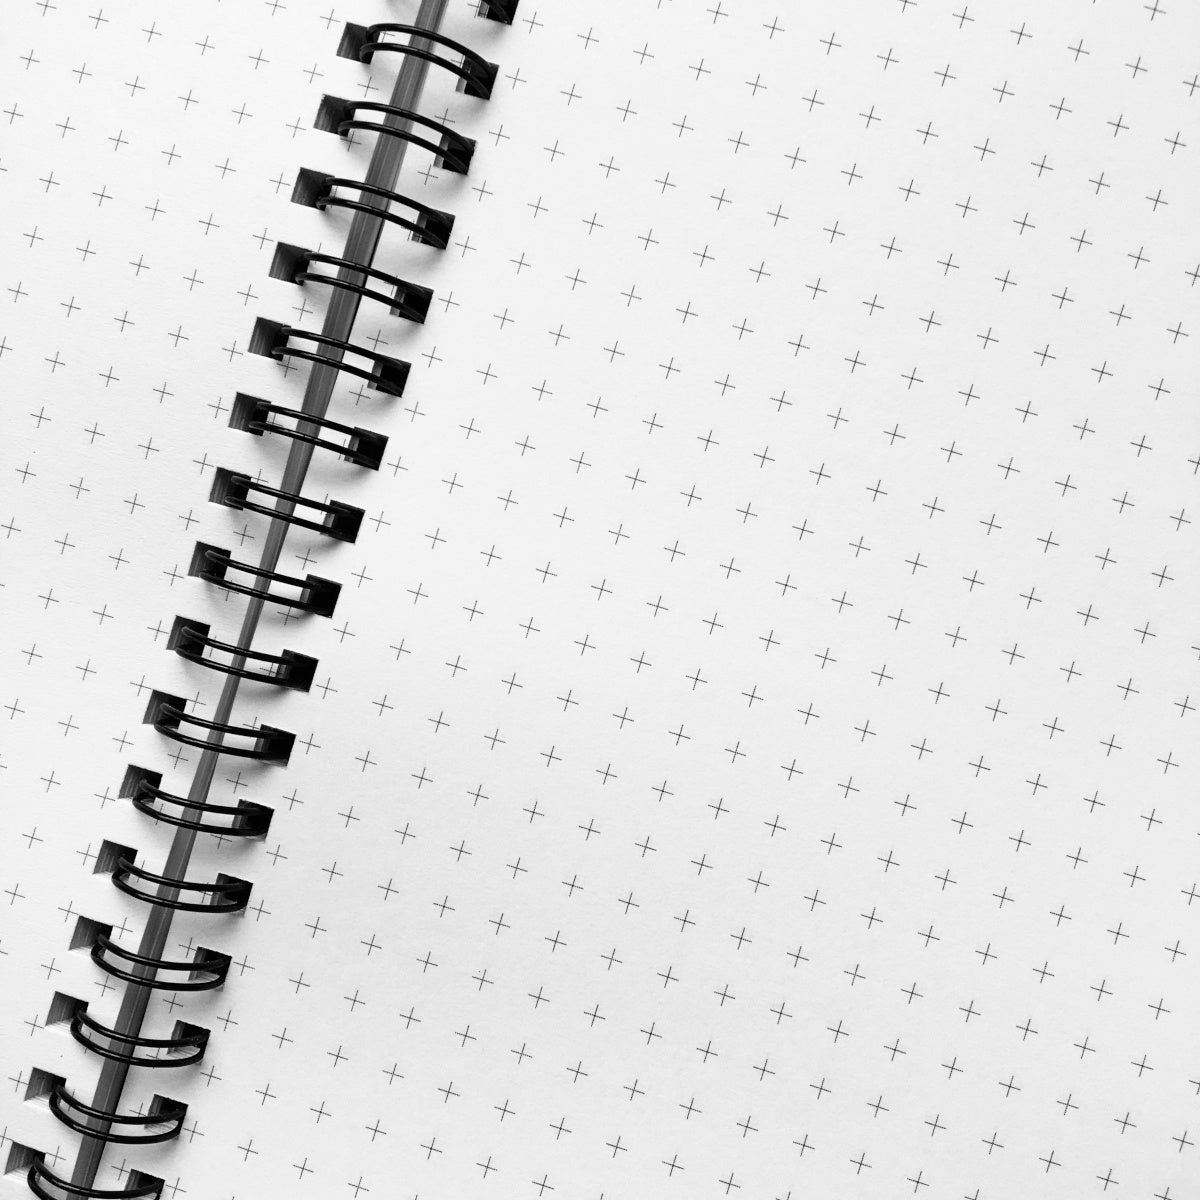 A spiral notebook open flat showing grid graph pages and the black spiral wire.